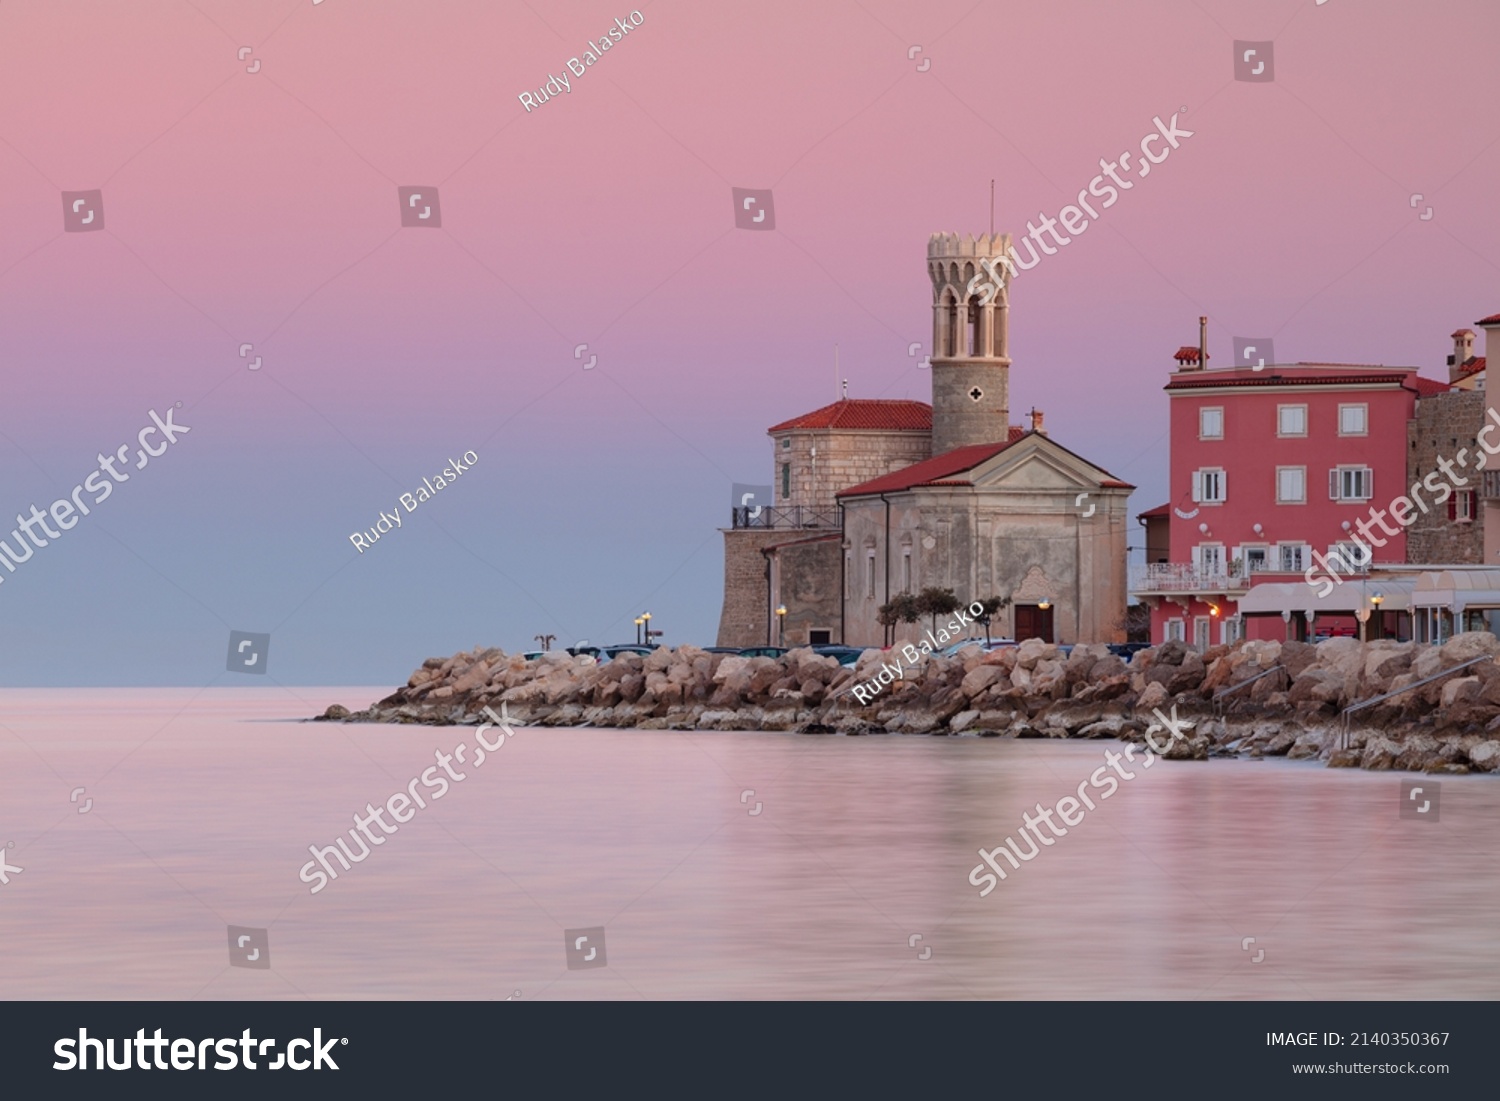 Piran, Slovenia. Cityscape image of Piran, Slovenia with historical church and lighthouse at sunrise. #2140350367